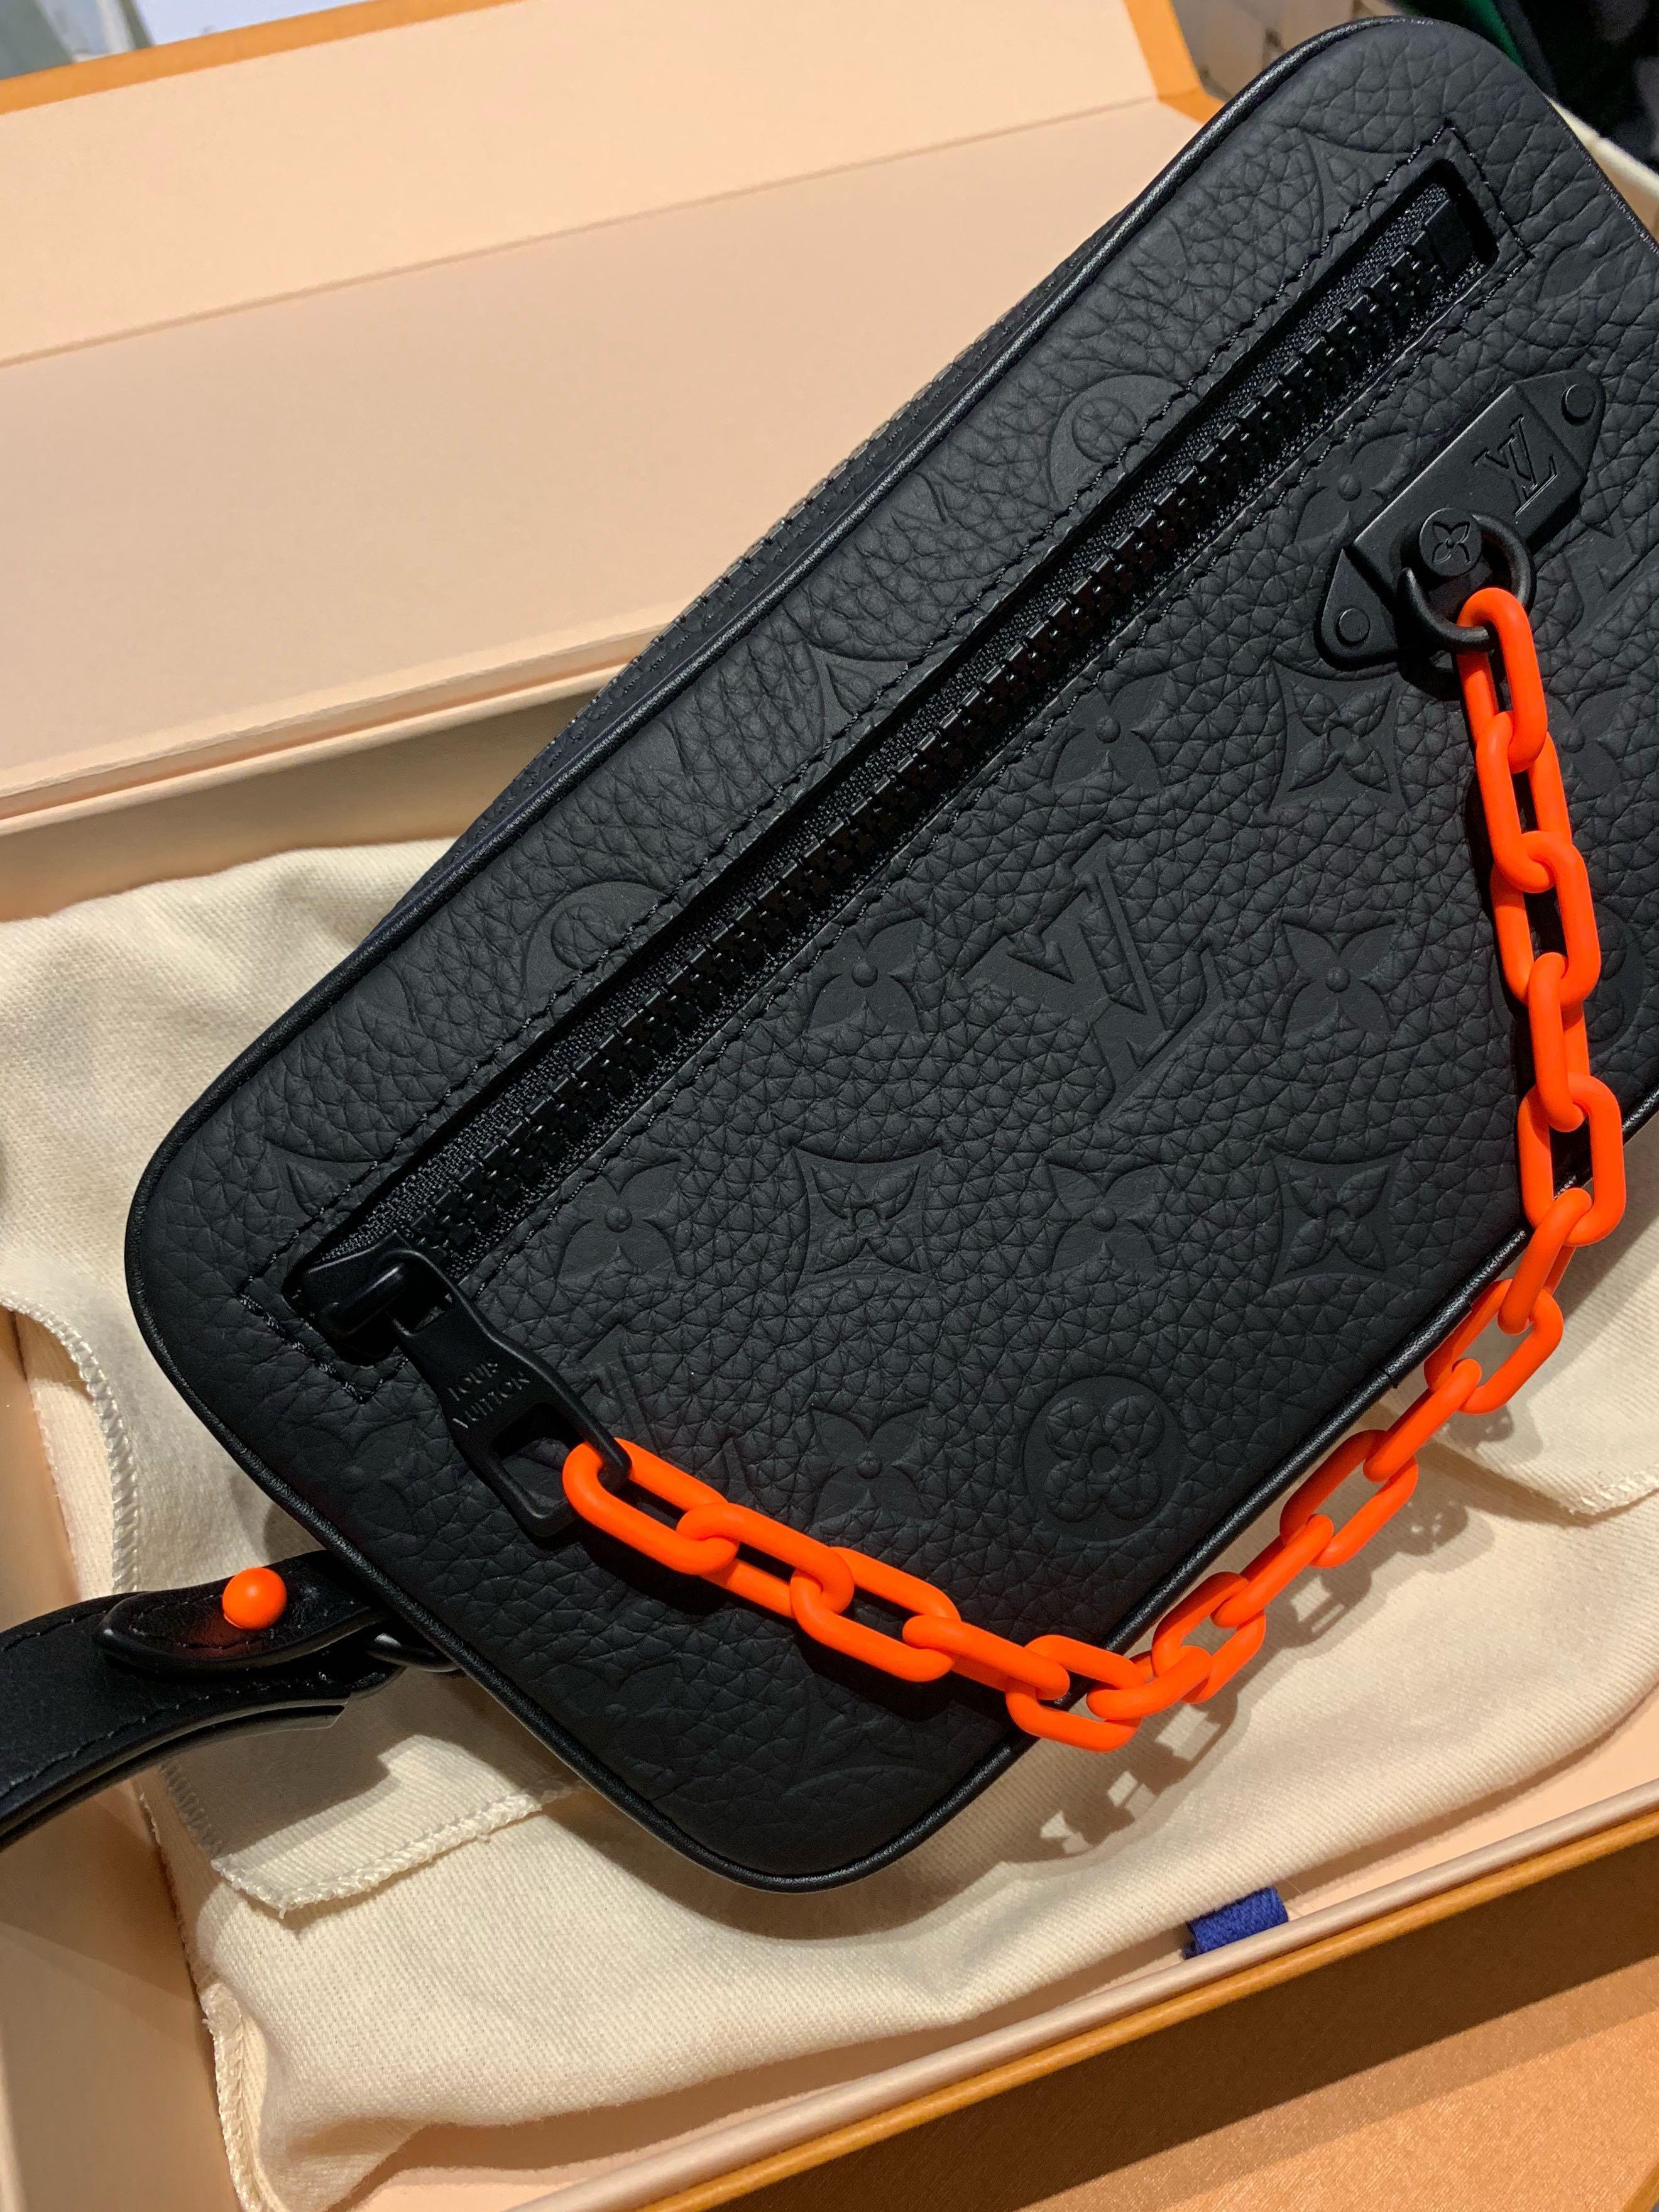 Louis Vuitton on X: Small yet spacious. The Pochette Volga from  #LouisVuitton's New Classics range is a versatile everyday accessory. See  more from the collection designed by #VirgilAbloh at    /